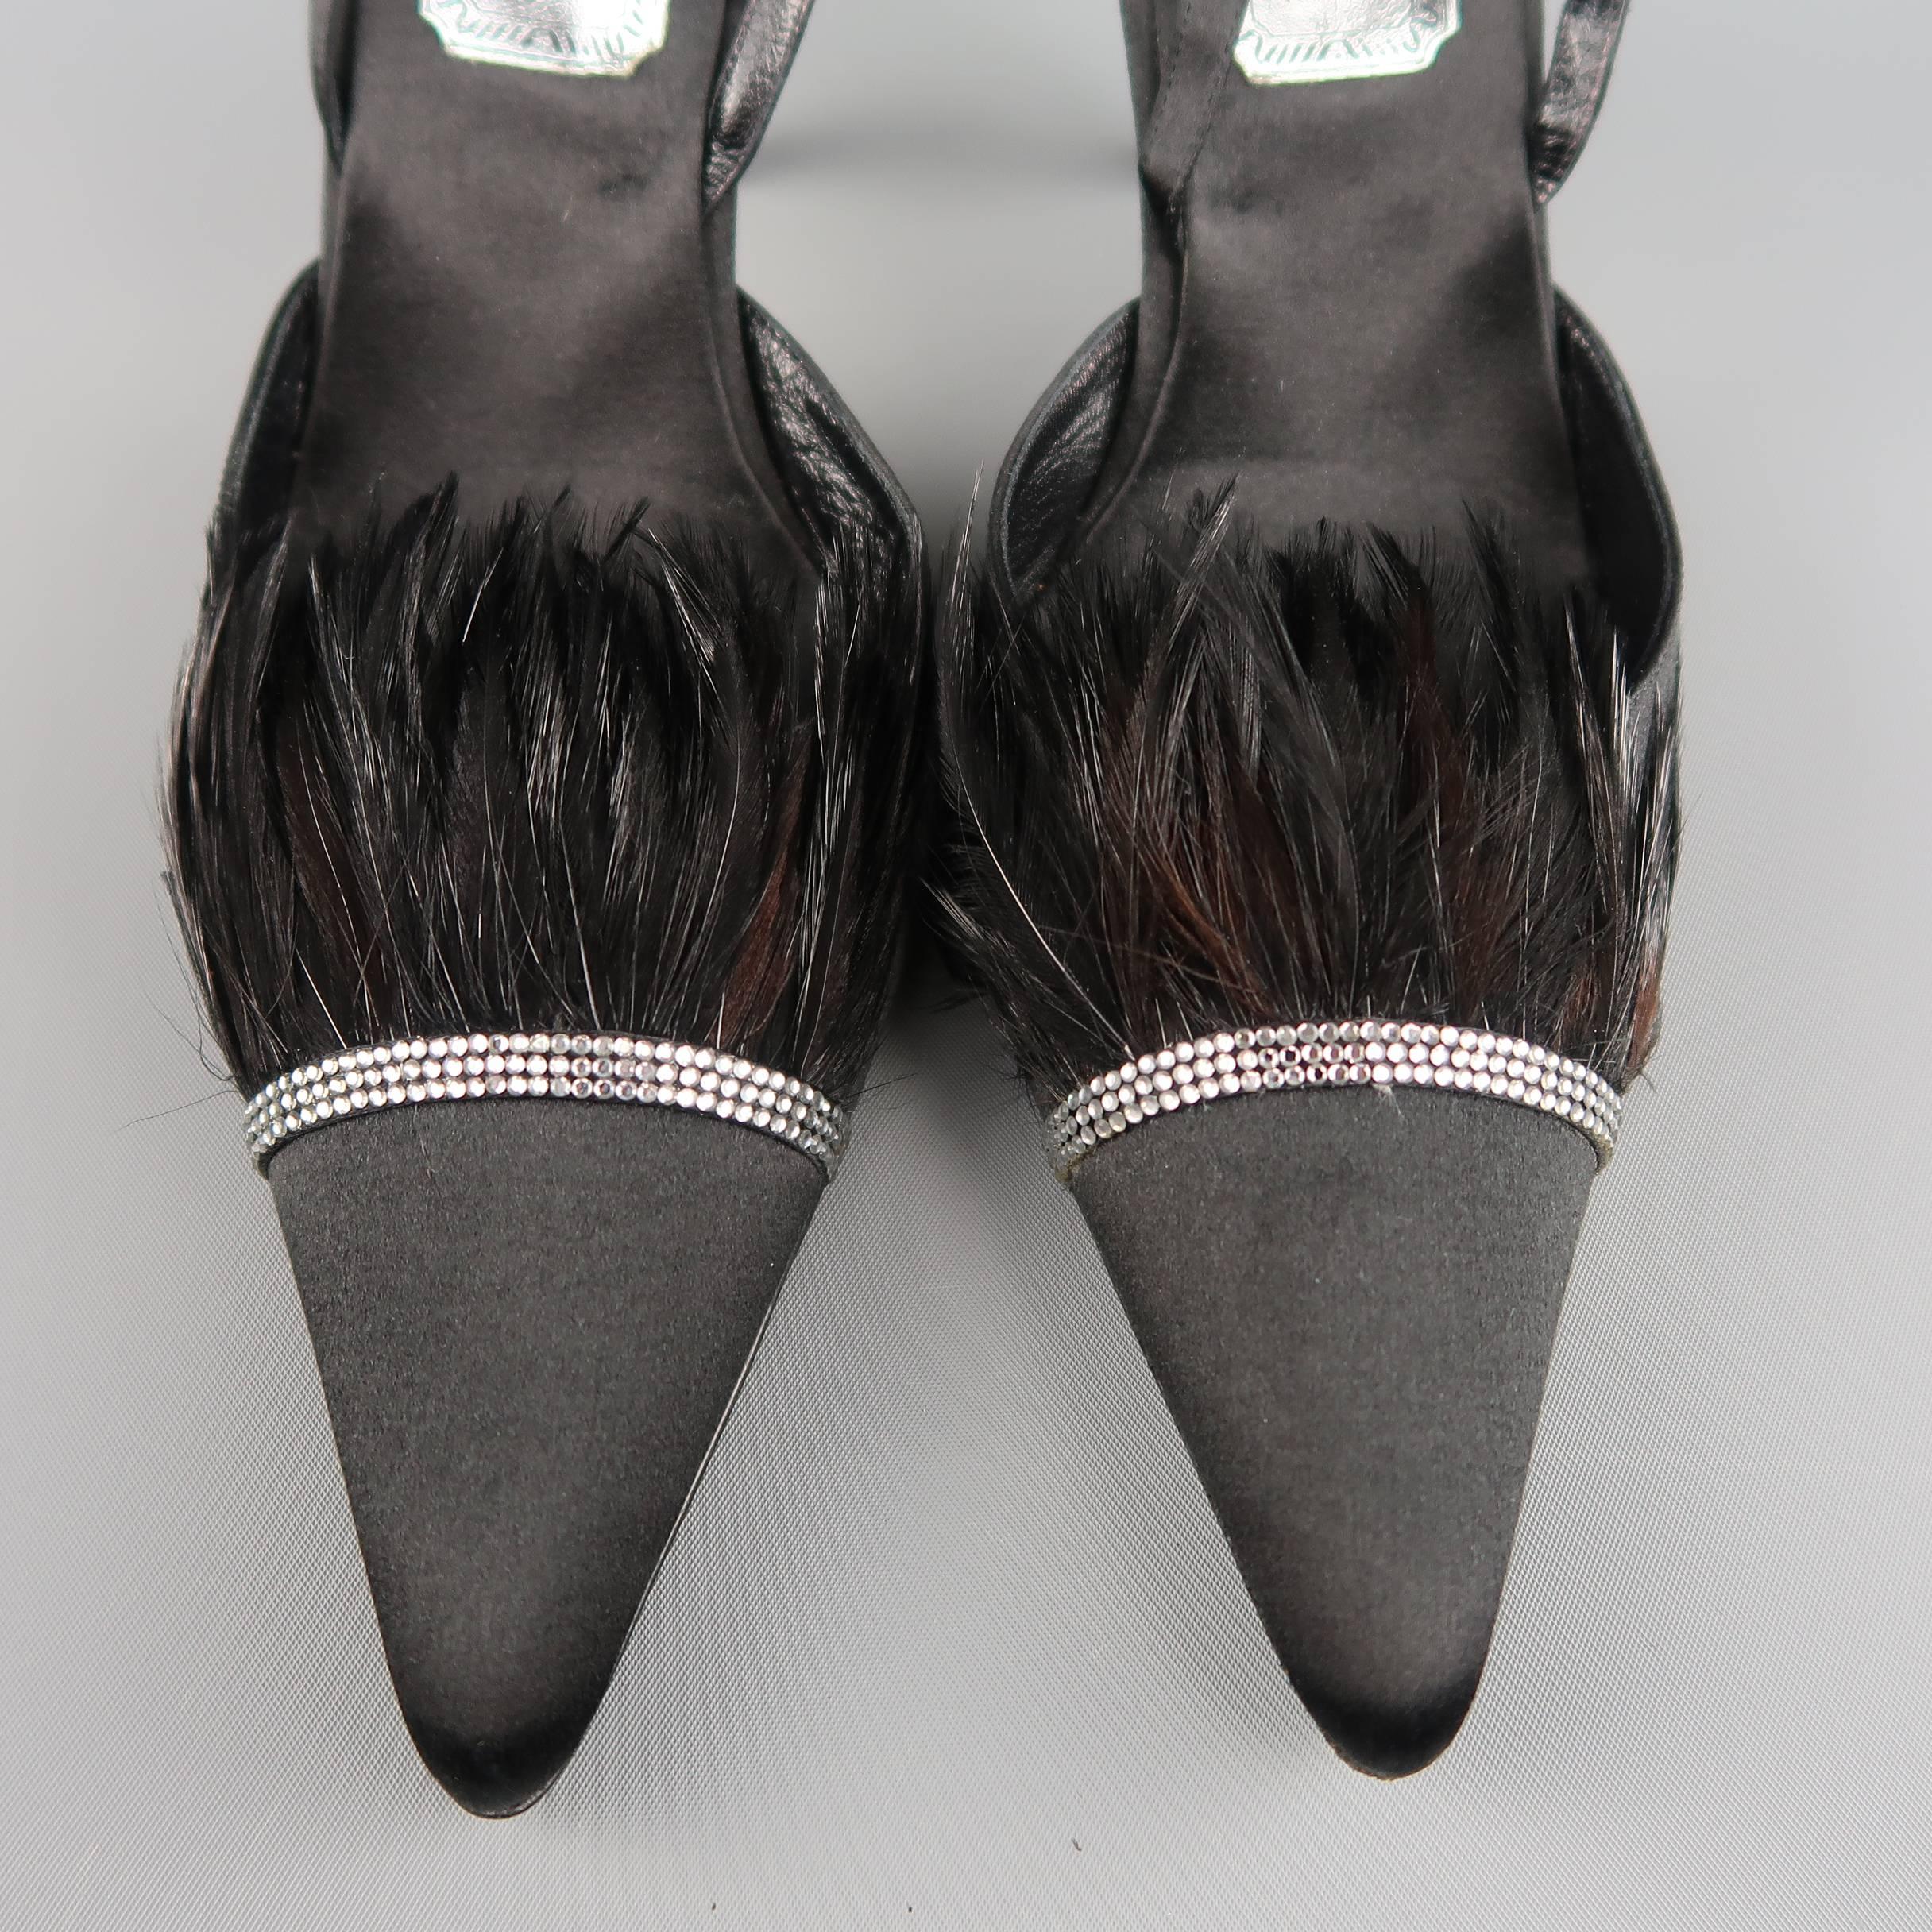 These fabulous evening pumps by RENE CAOVILLA slingback pumps come in black silk satin and feature a pointed toe with rhinestone and feather trim embellishment with a covered stiletto heel. Never worn. Made in Italy.
 
New without Tags.
Marked: IT